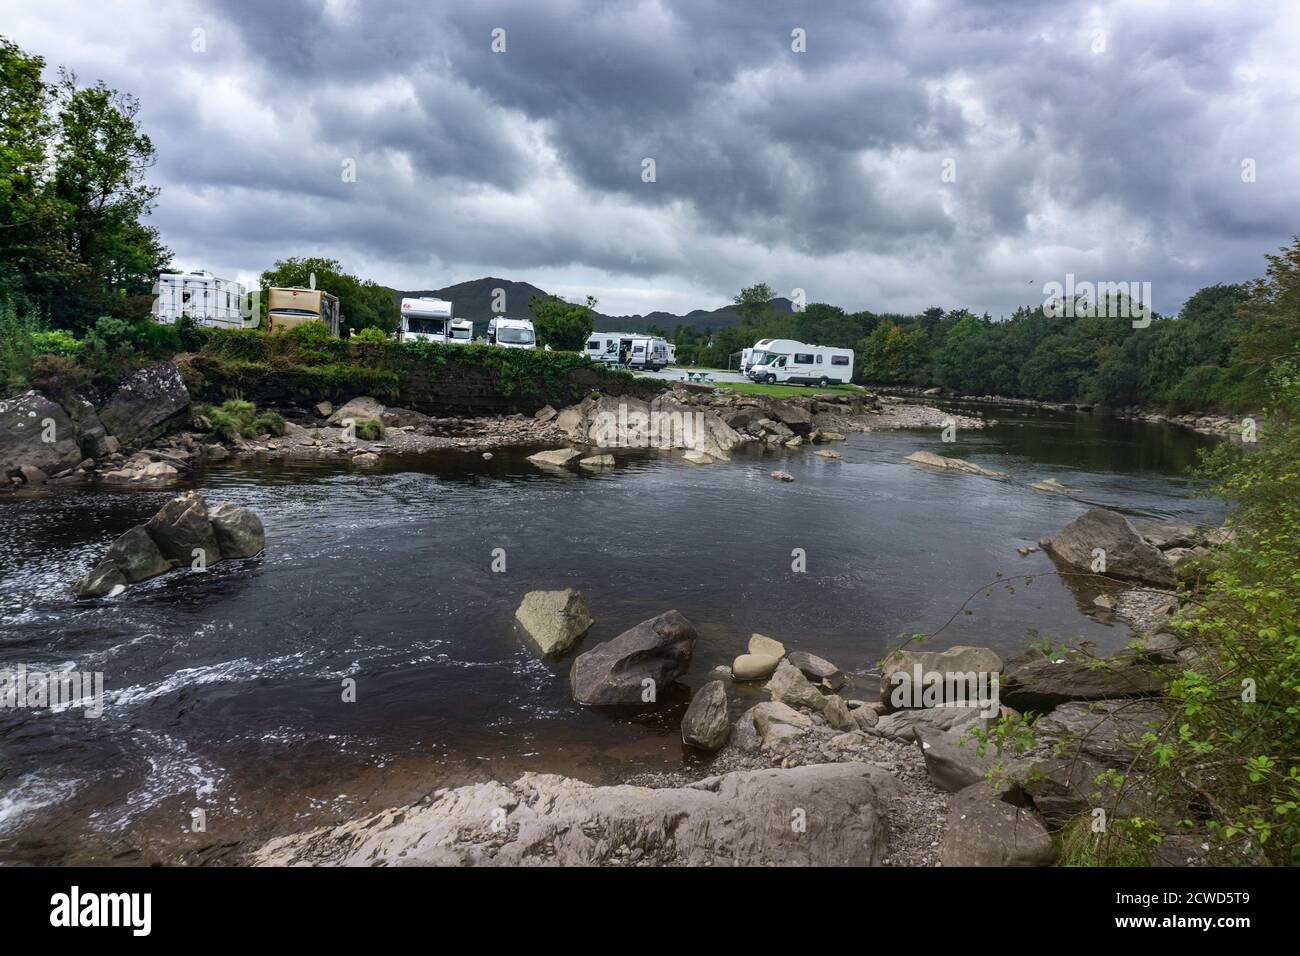 Camper vans parked near the centre of the village of Sneem, County Kerry, Ireland, along the banks of Sneem river. Stock Photo